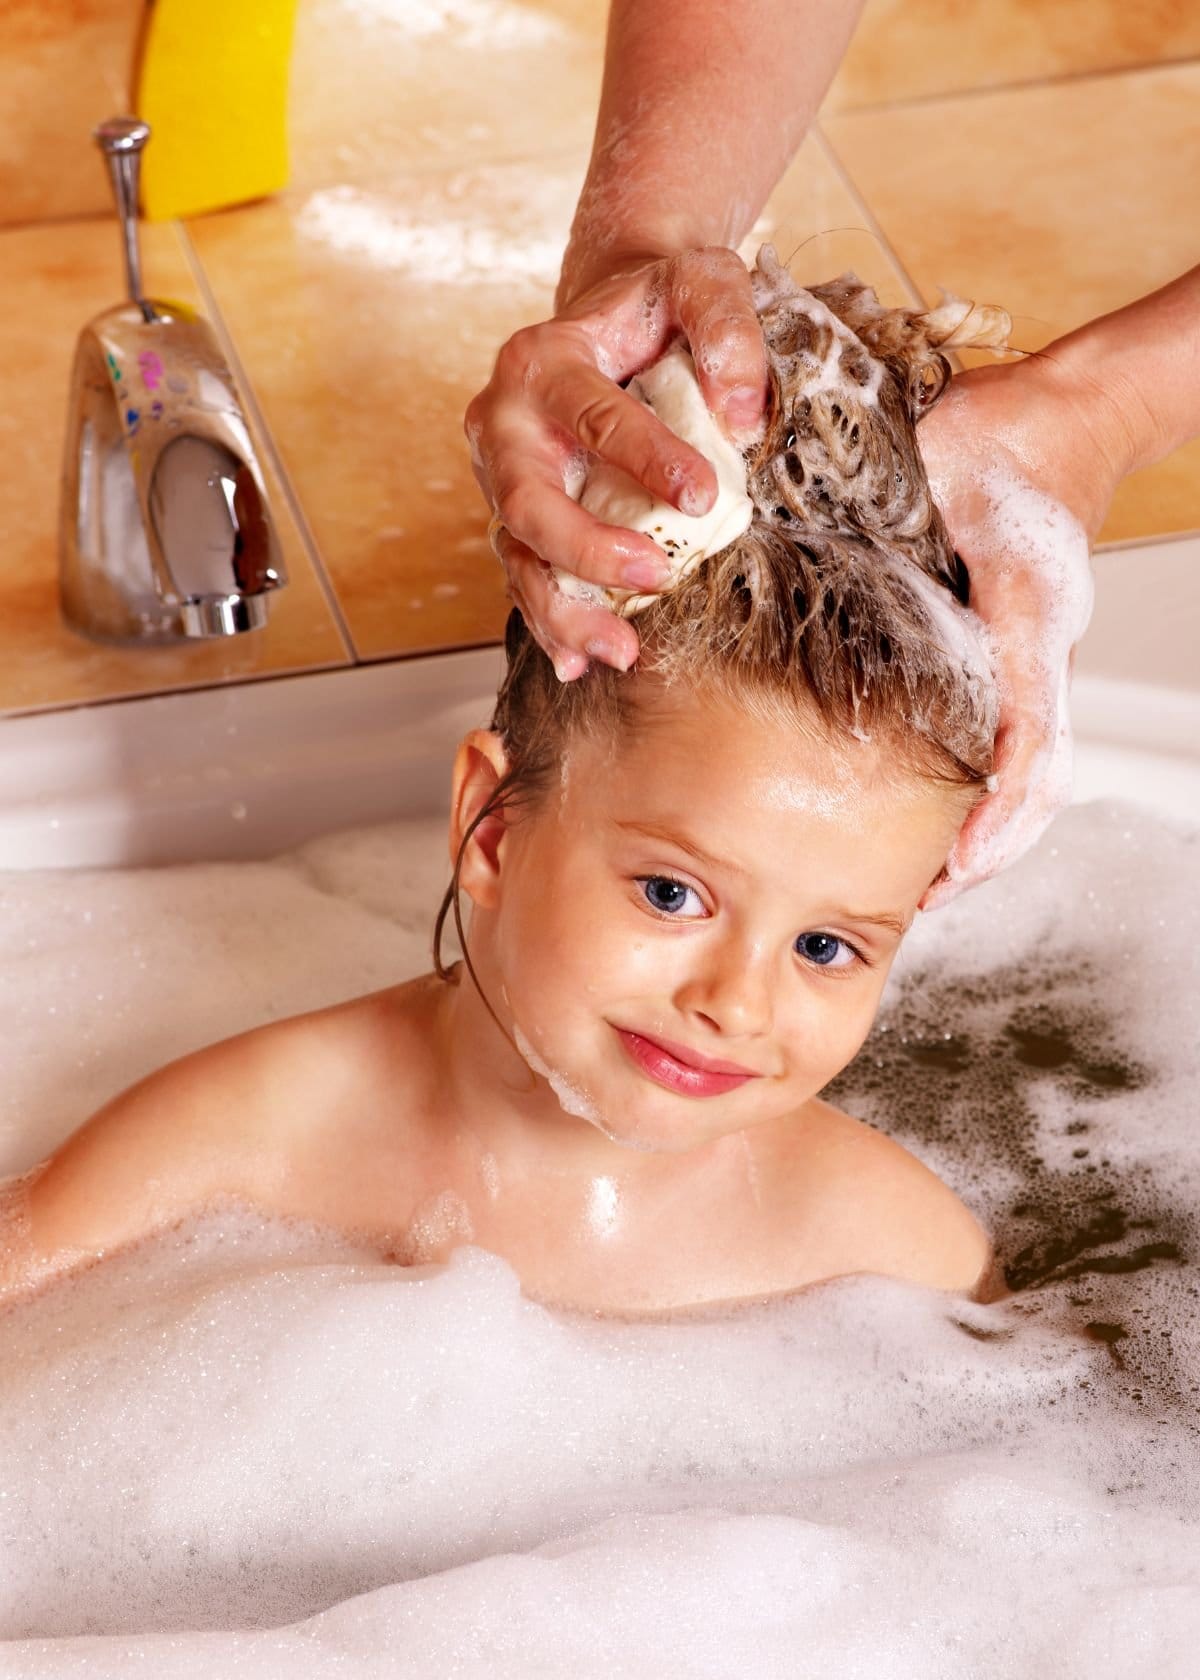 When Can Kids Use Adult Shampoo? Right Age for Shampoo Transition